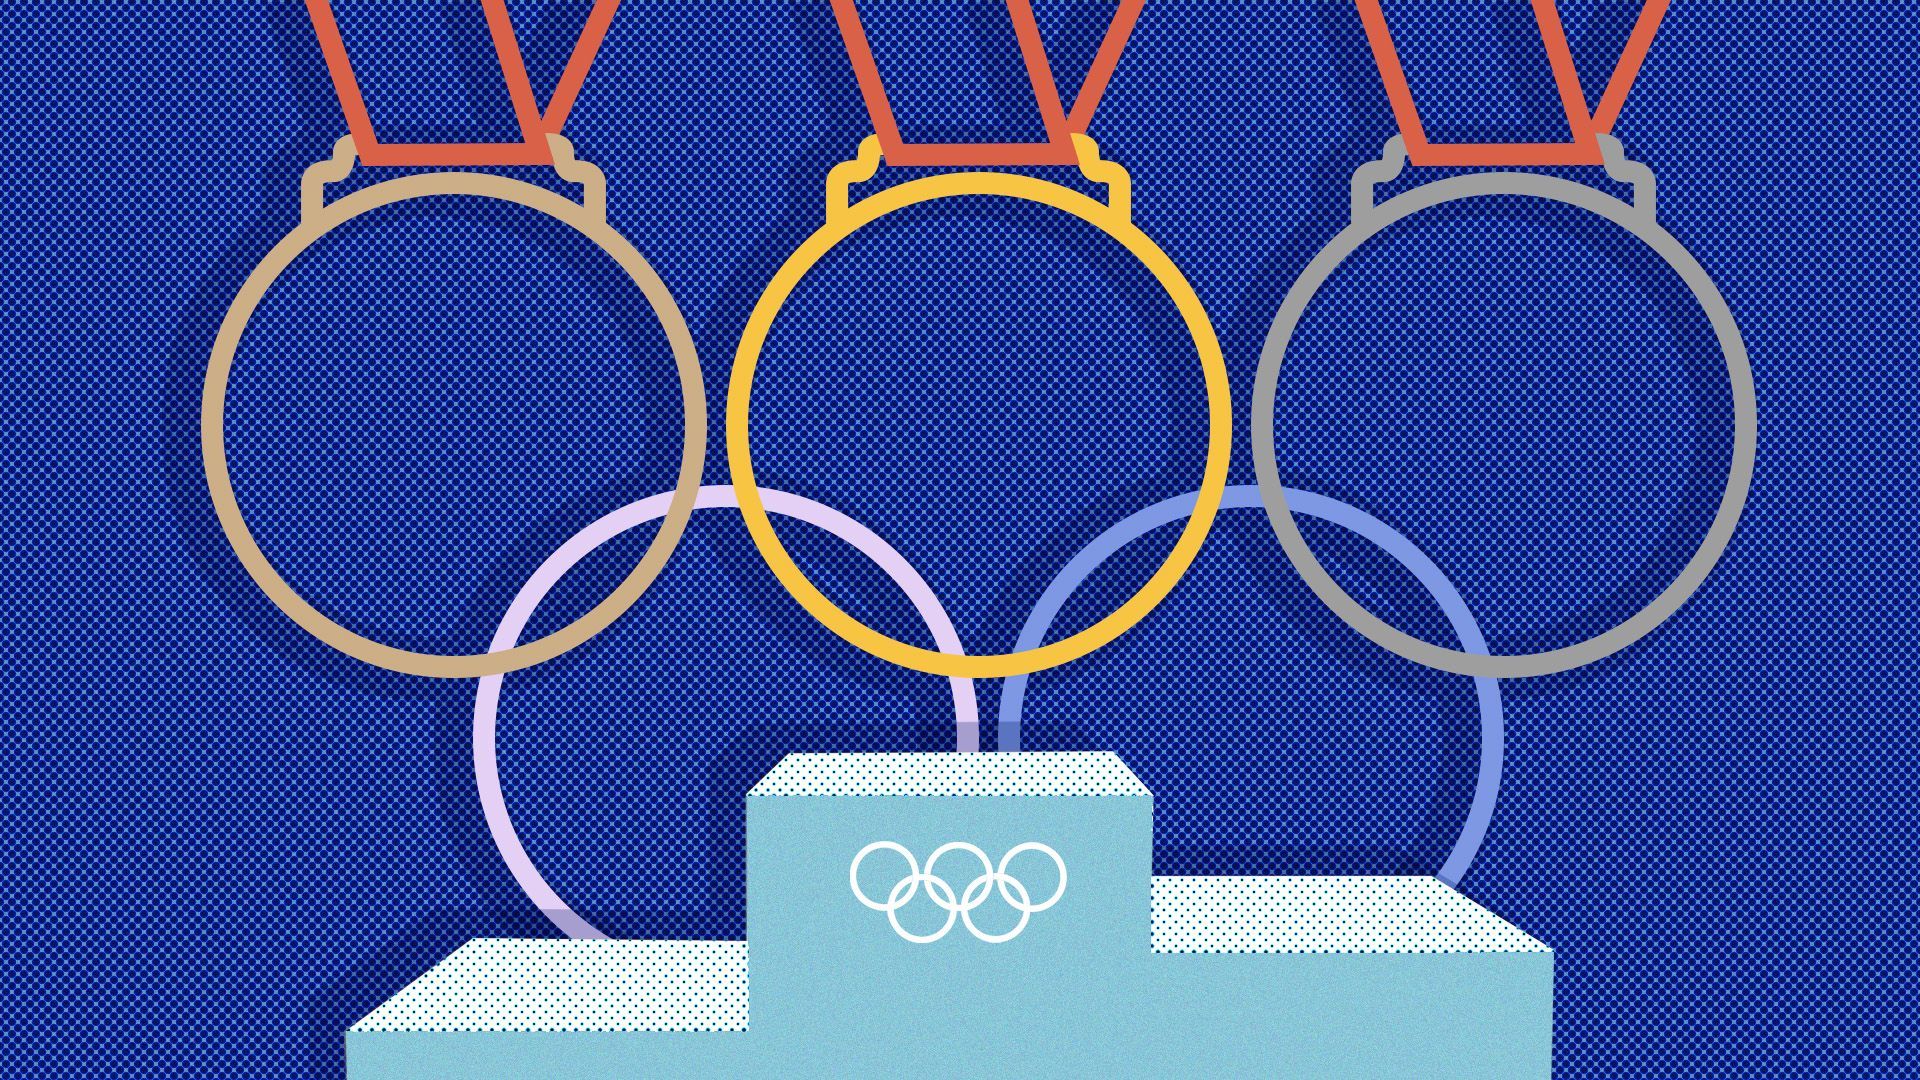 Illustration of the Olympic rings behind a podium. The top 3 rings of the symbol are bronze, silver, and gold medals. 